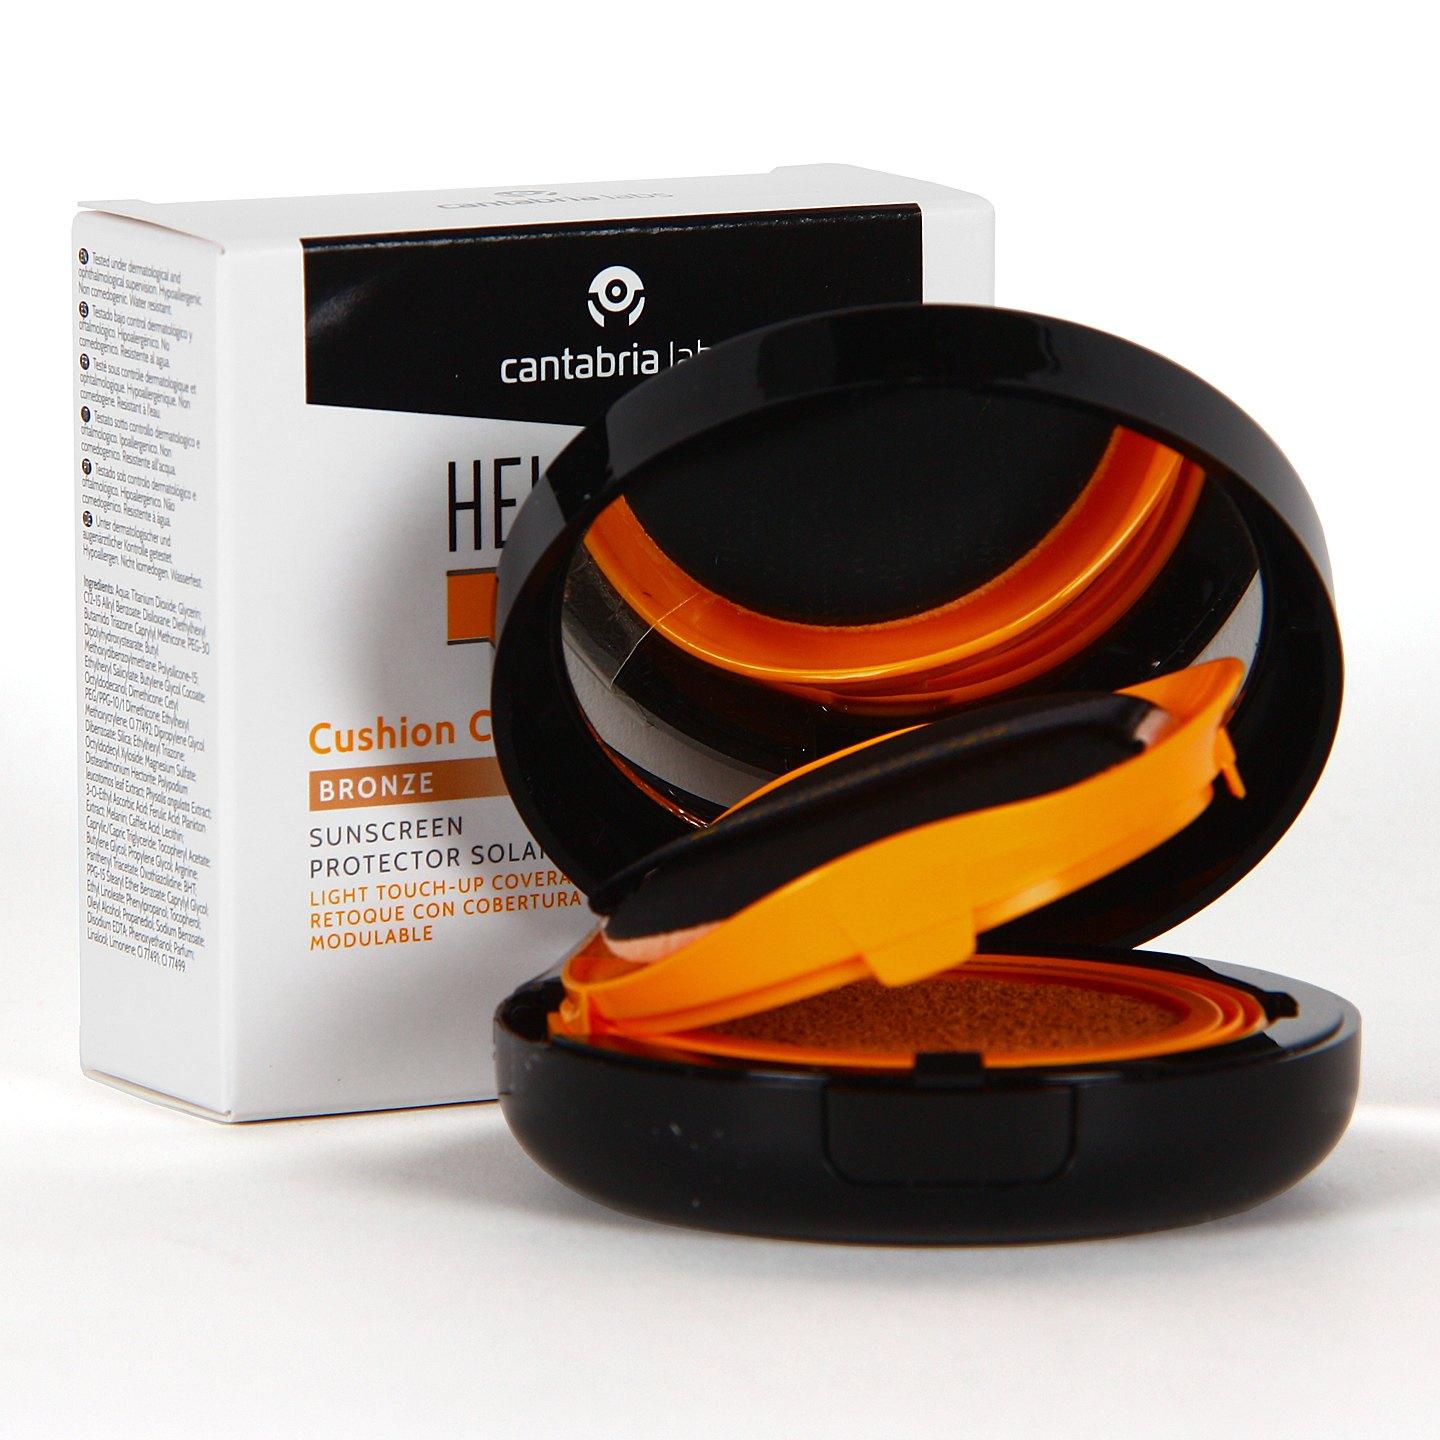 HELIOCARE 360 COLOR CUSHION COMPACT BRONZE SPF50 15 GR.